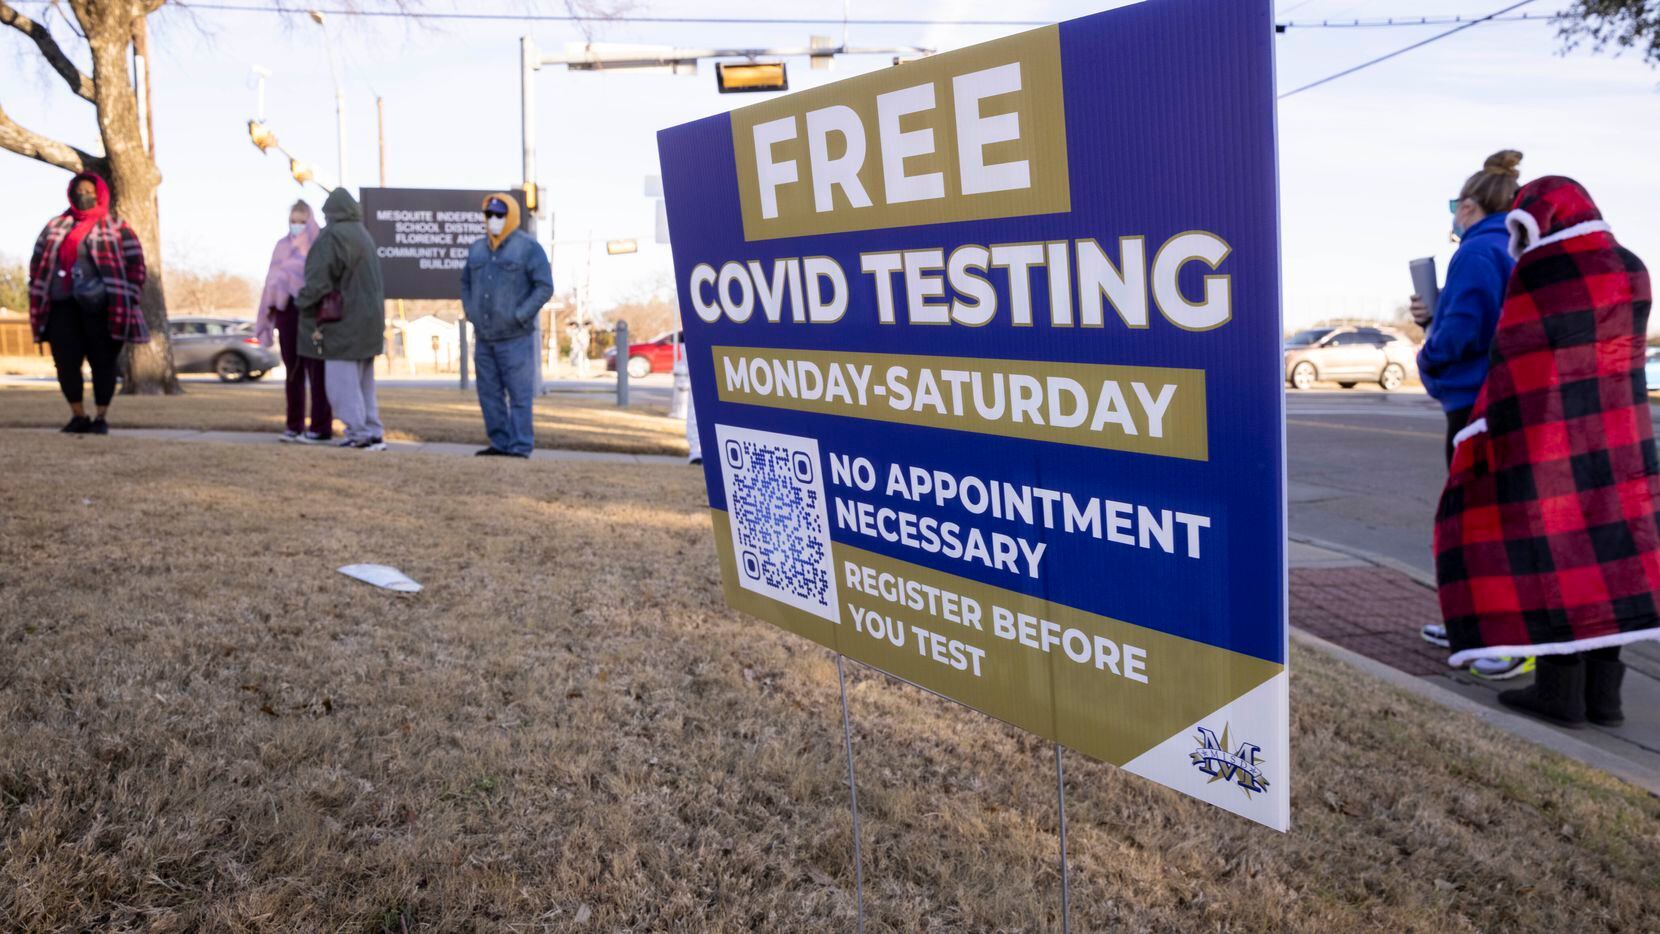 Mesquite ISD, which offered free COVID-19 testing this week, will close all campuses through...